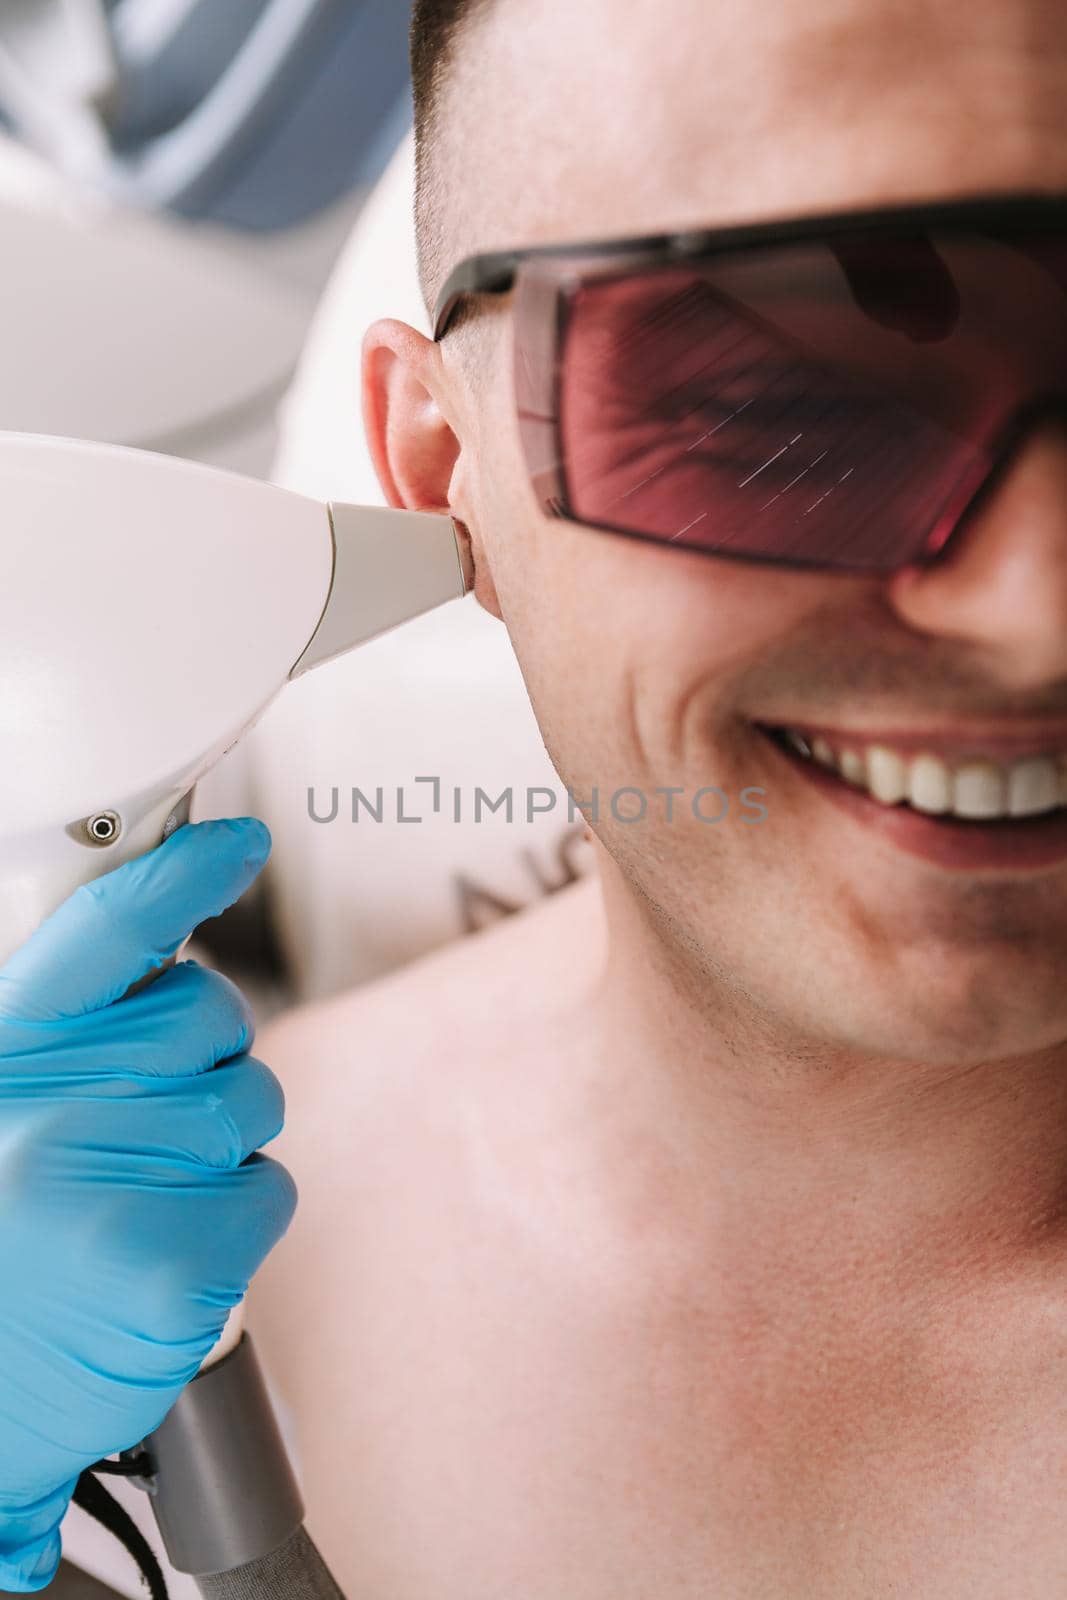 Cropped close up of a man smiling, getting laser hair removal treatment on his ear. Beautician removing hair on the ear of a male client, using laser